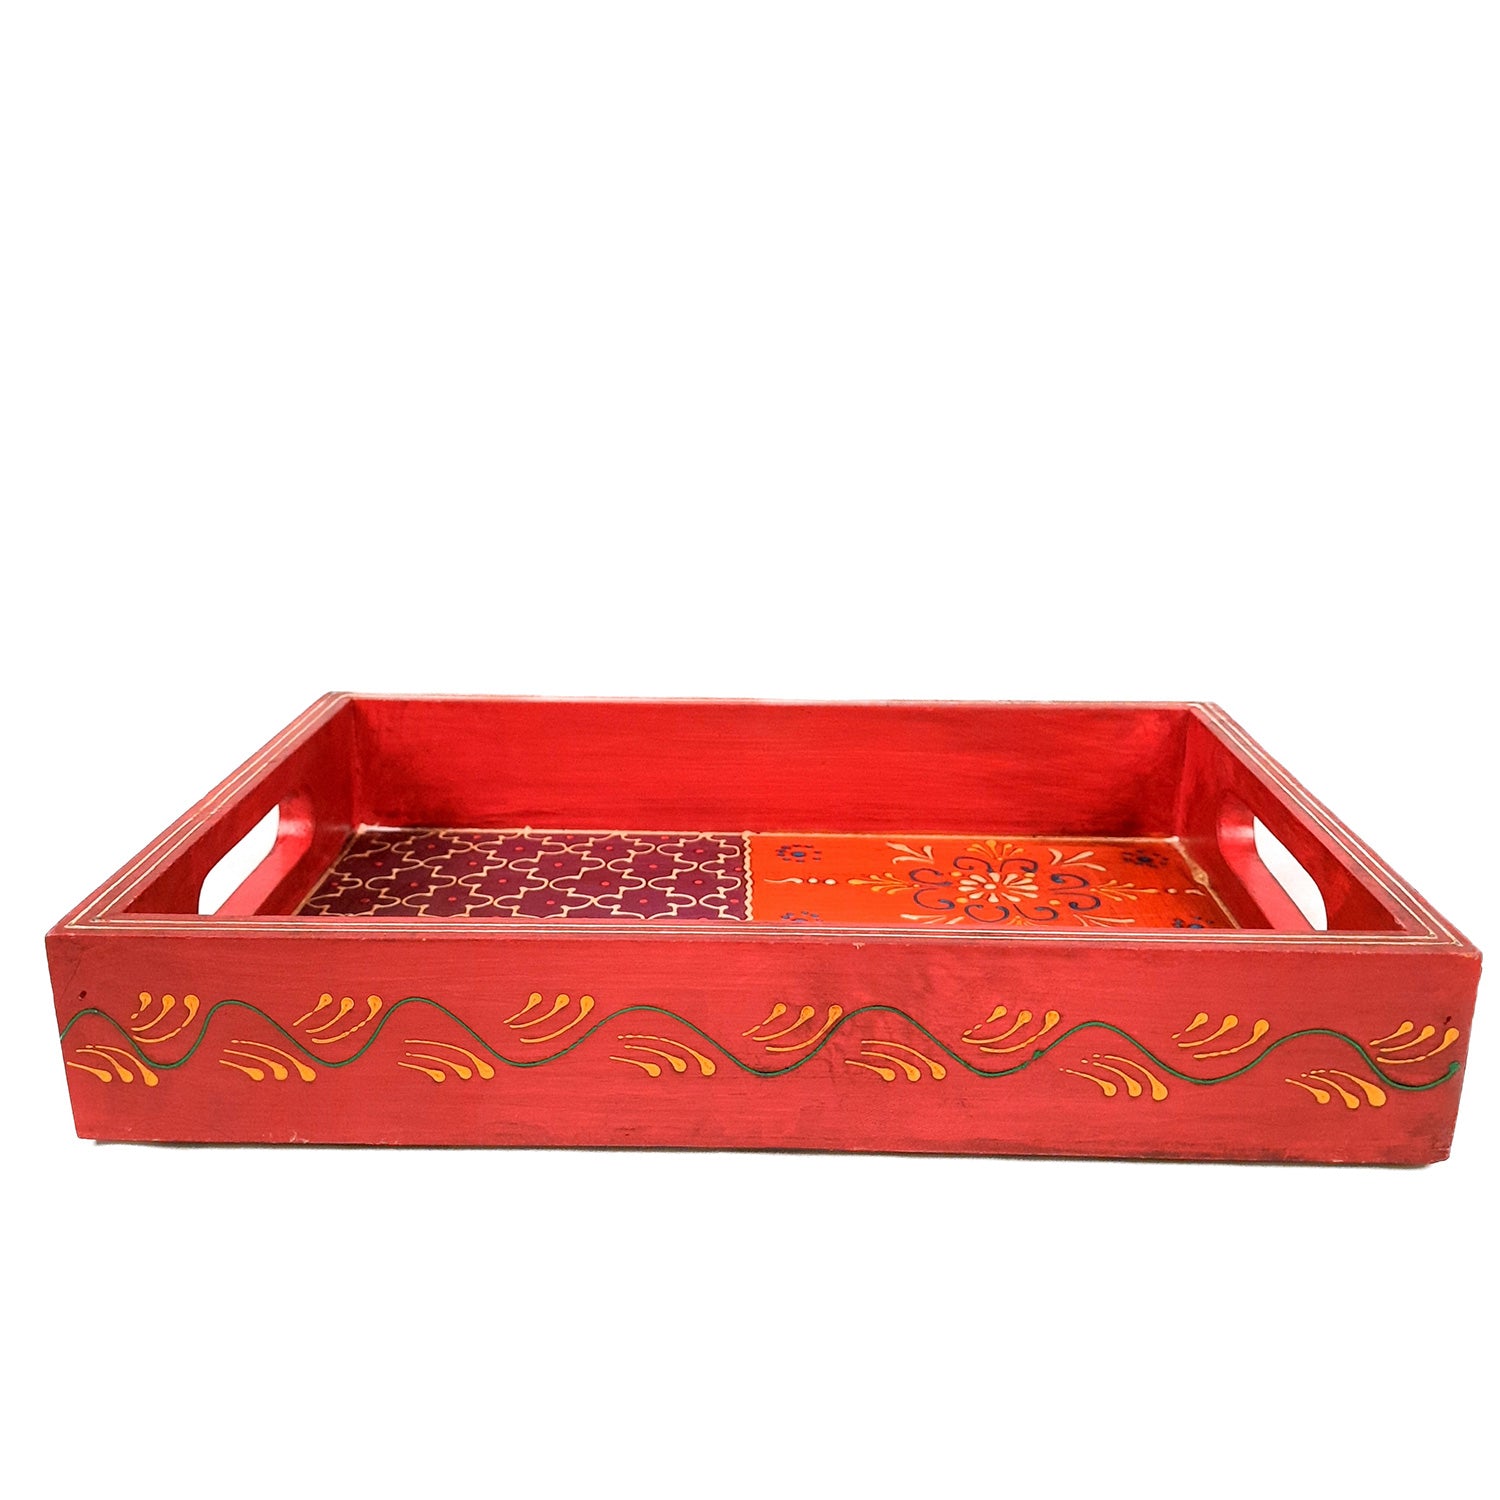 Kabello Cardboard Trays for Decoration Gifts Saree Packing 4 Pcs Pack of 1  (M16 (4 PCS)) : Amazon.in: Home & Kitchen